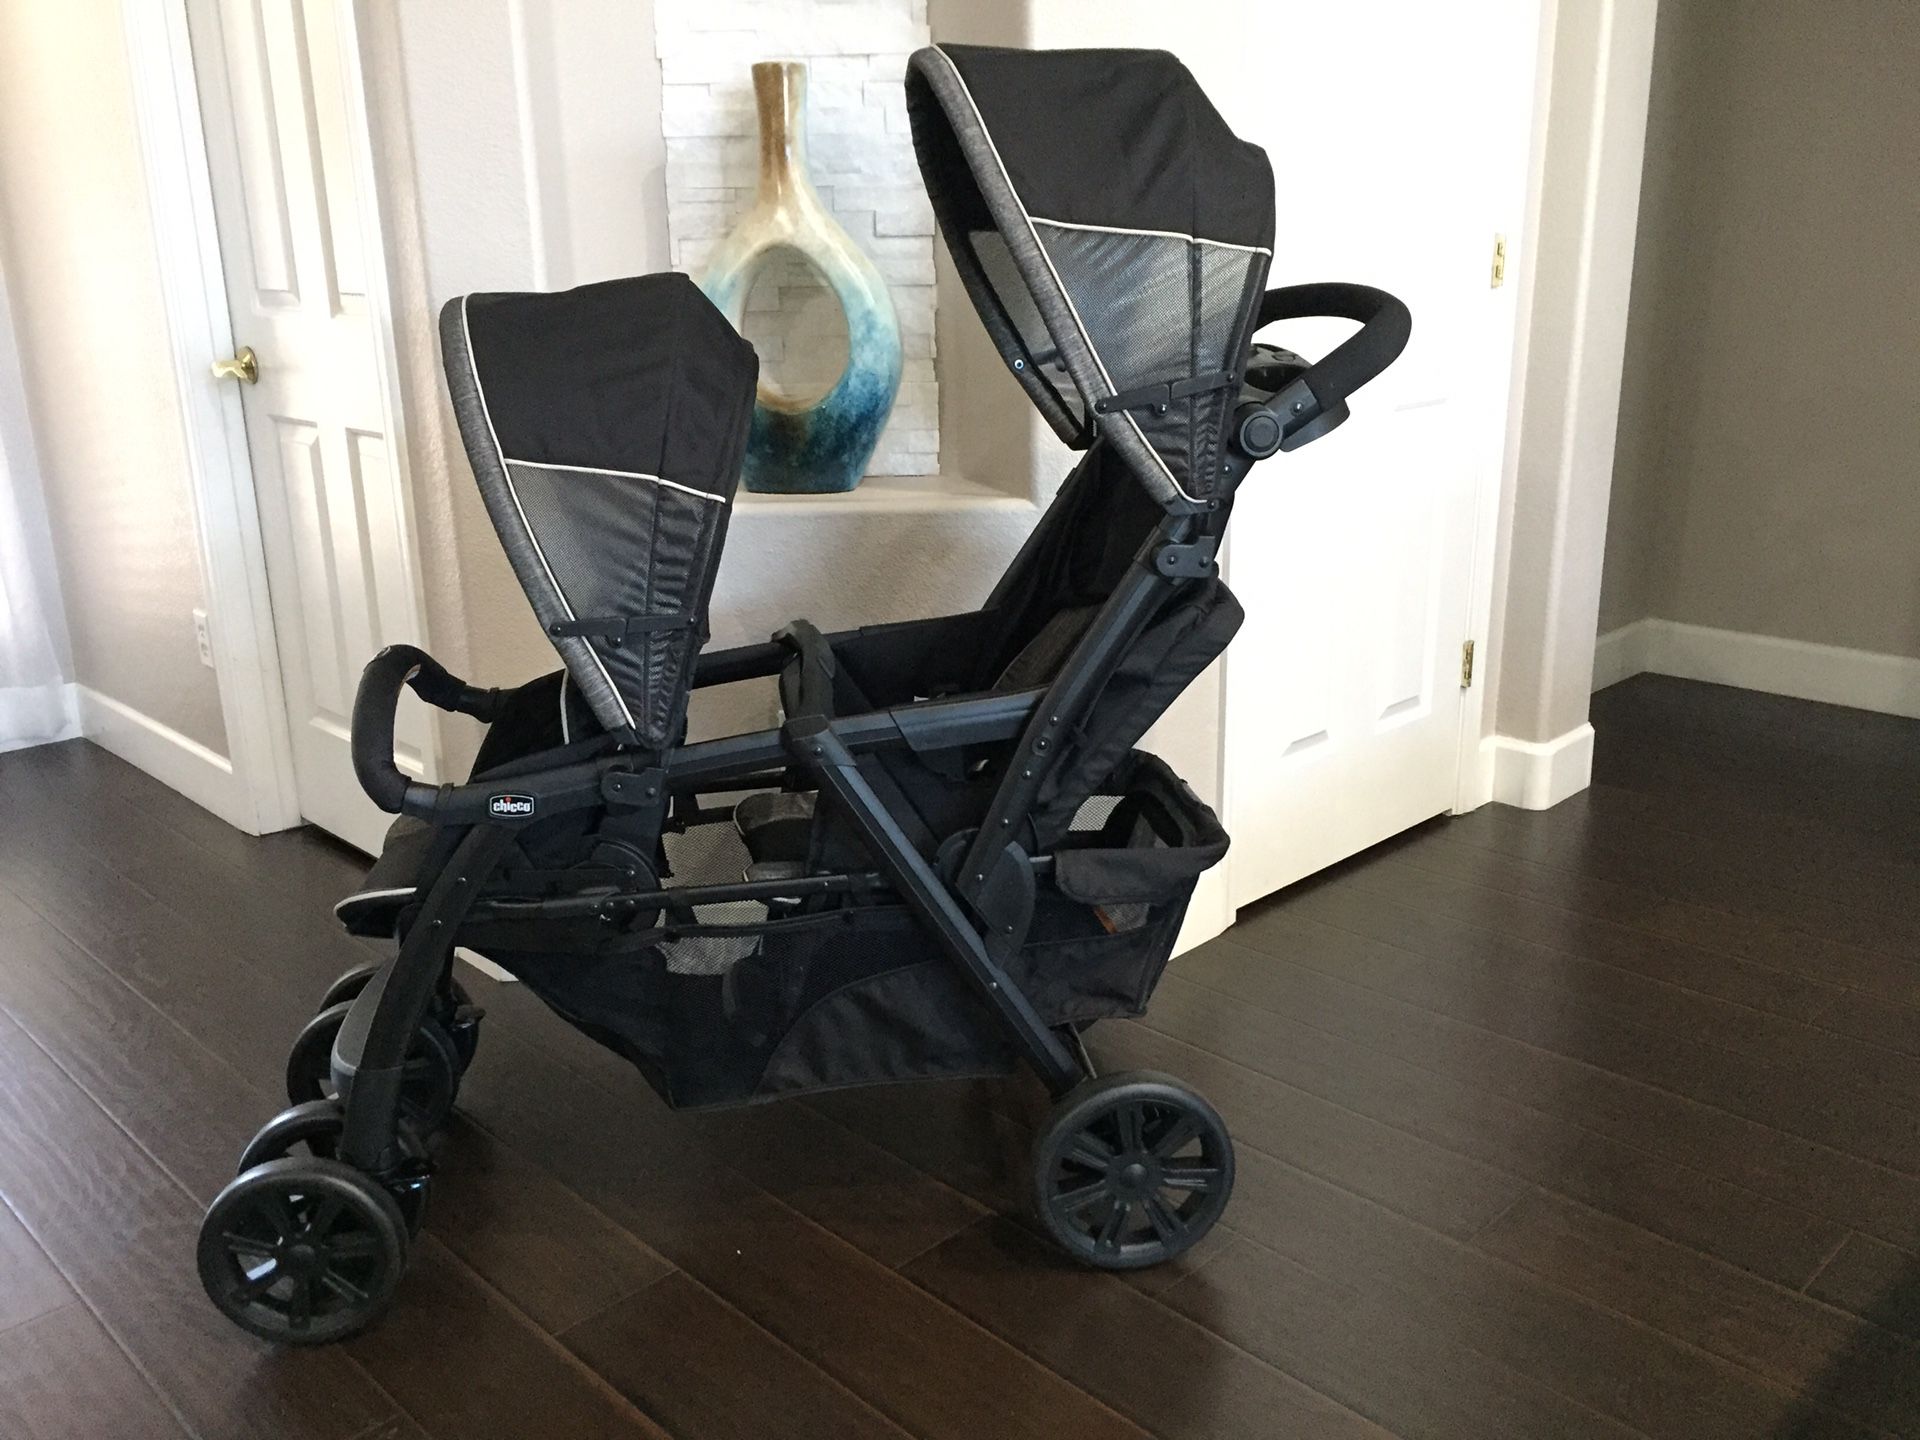 Brand new Chicco Cortina Together Double Stroller